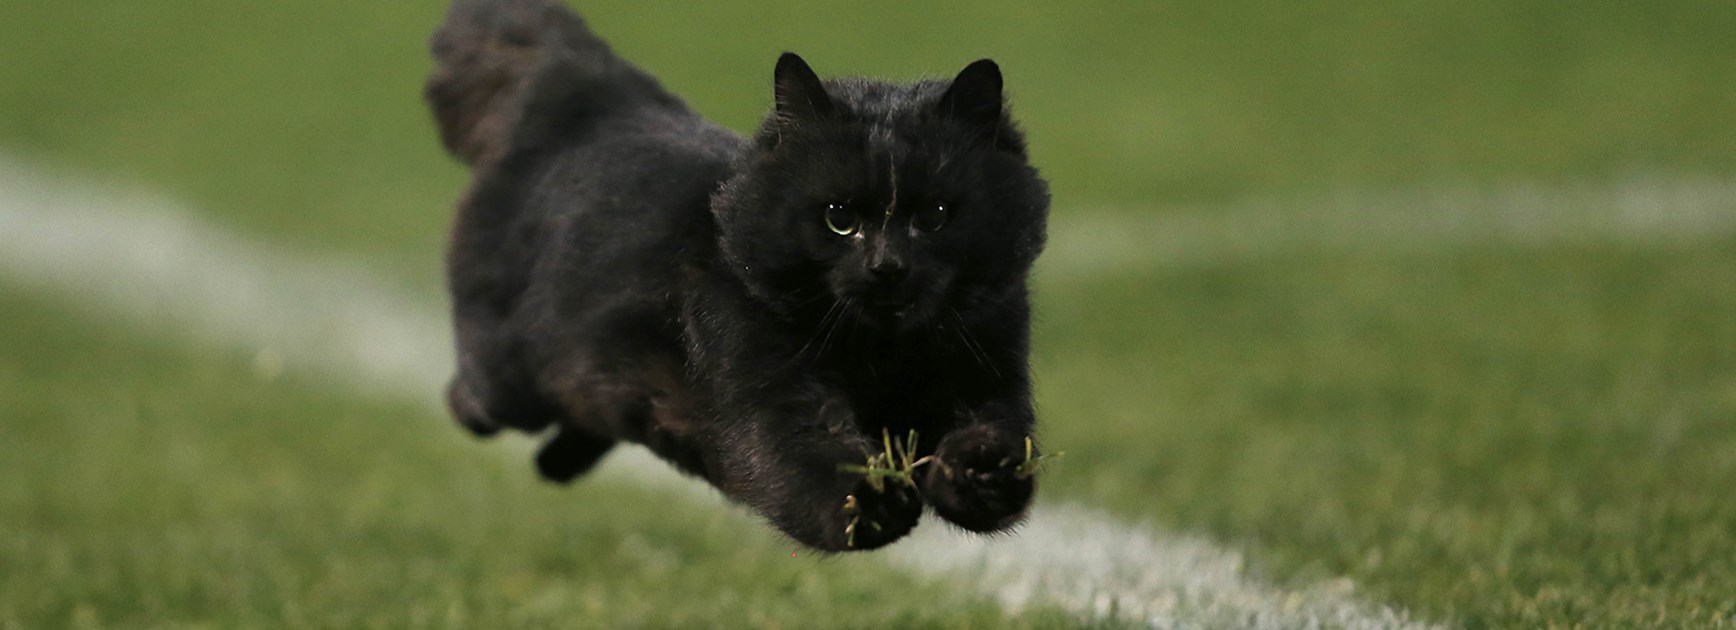 This is not the usual black cat we are used to seeing at Penrith home games.